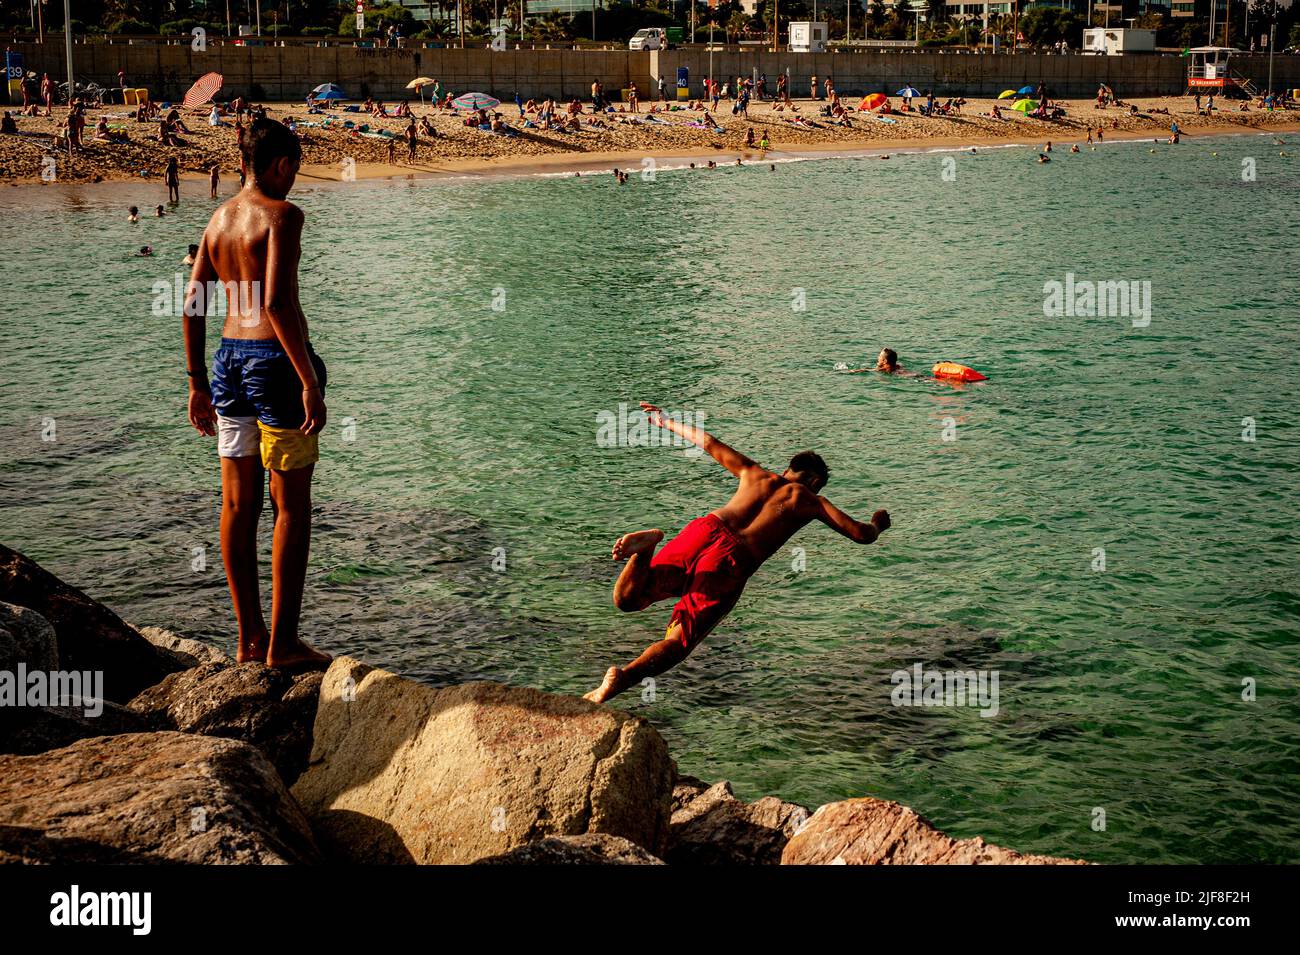 Young boy jumps to the sea from a breakwater at Llevant beach in Barcelona. Barcelona City Council has published a report warning that it is necessary to monitor whether carcinogenic substances are emerging in an area of Llevant beach. The City Council has had the results since last February but has not released them so far as required by various environmental organizations. Stock Photo